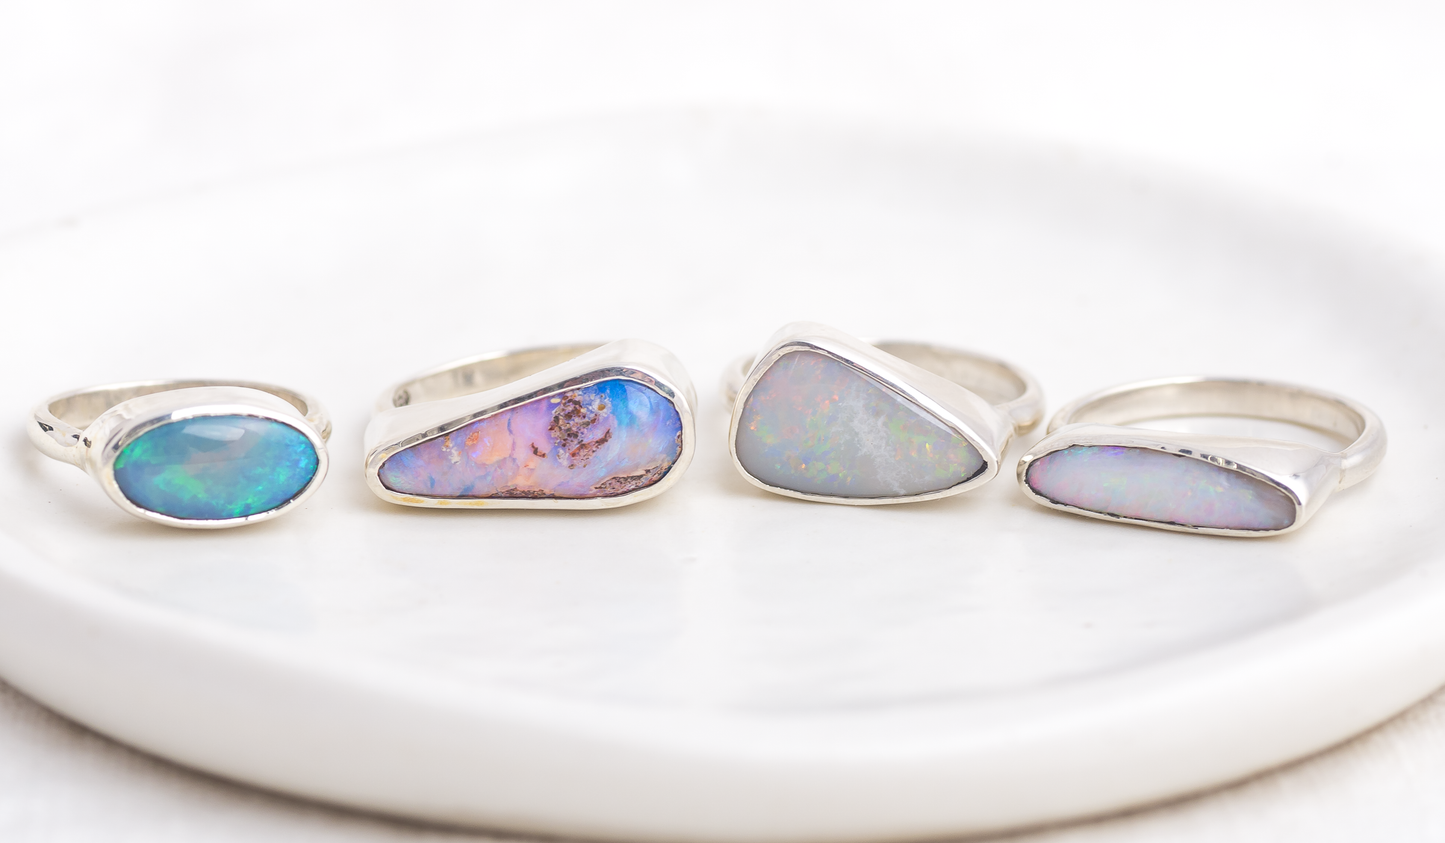 Opal East West Ring #4 ◇ Australian Opal ◇ Made in your size.